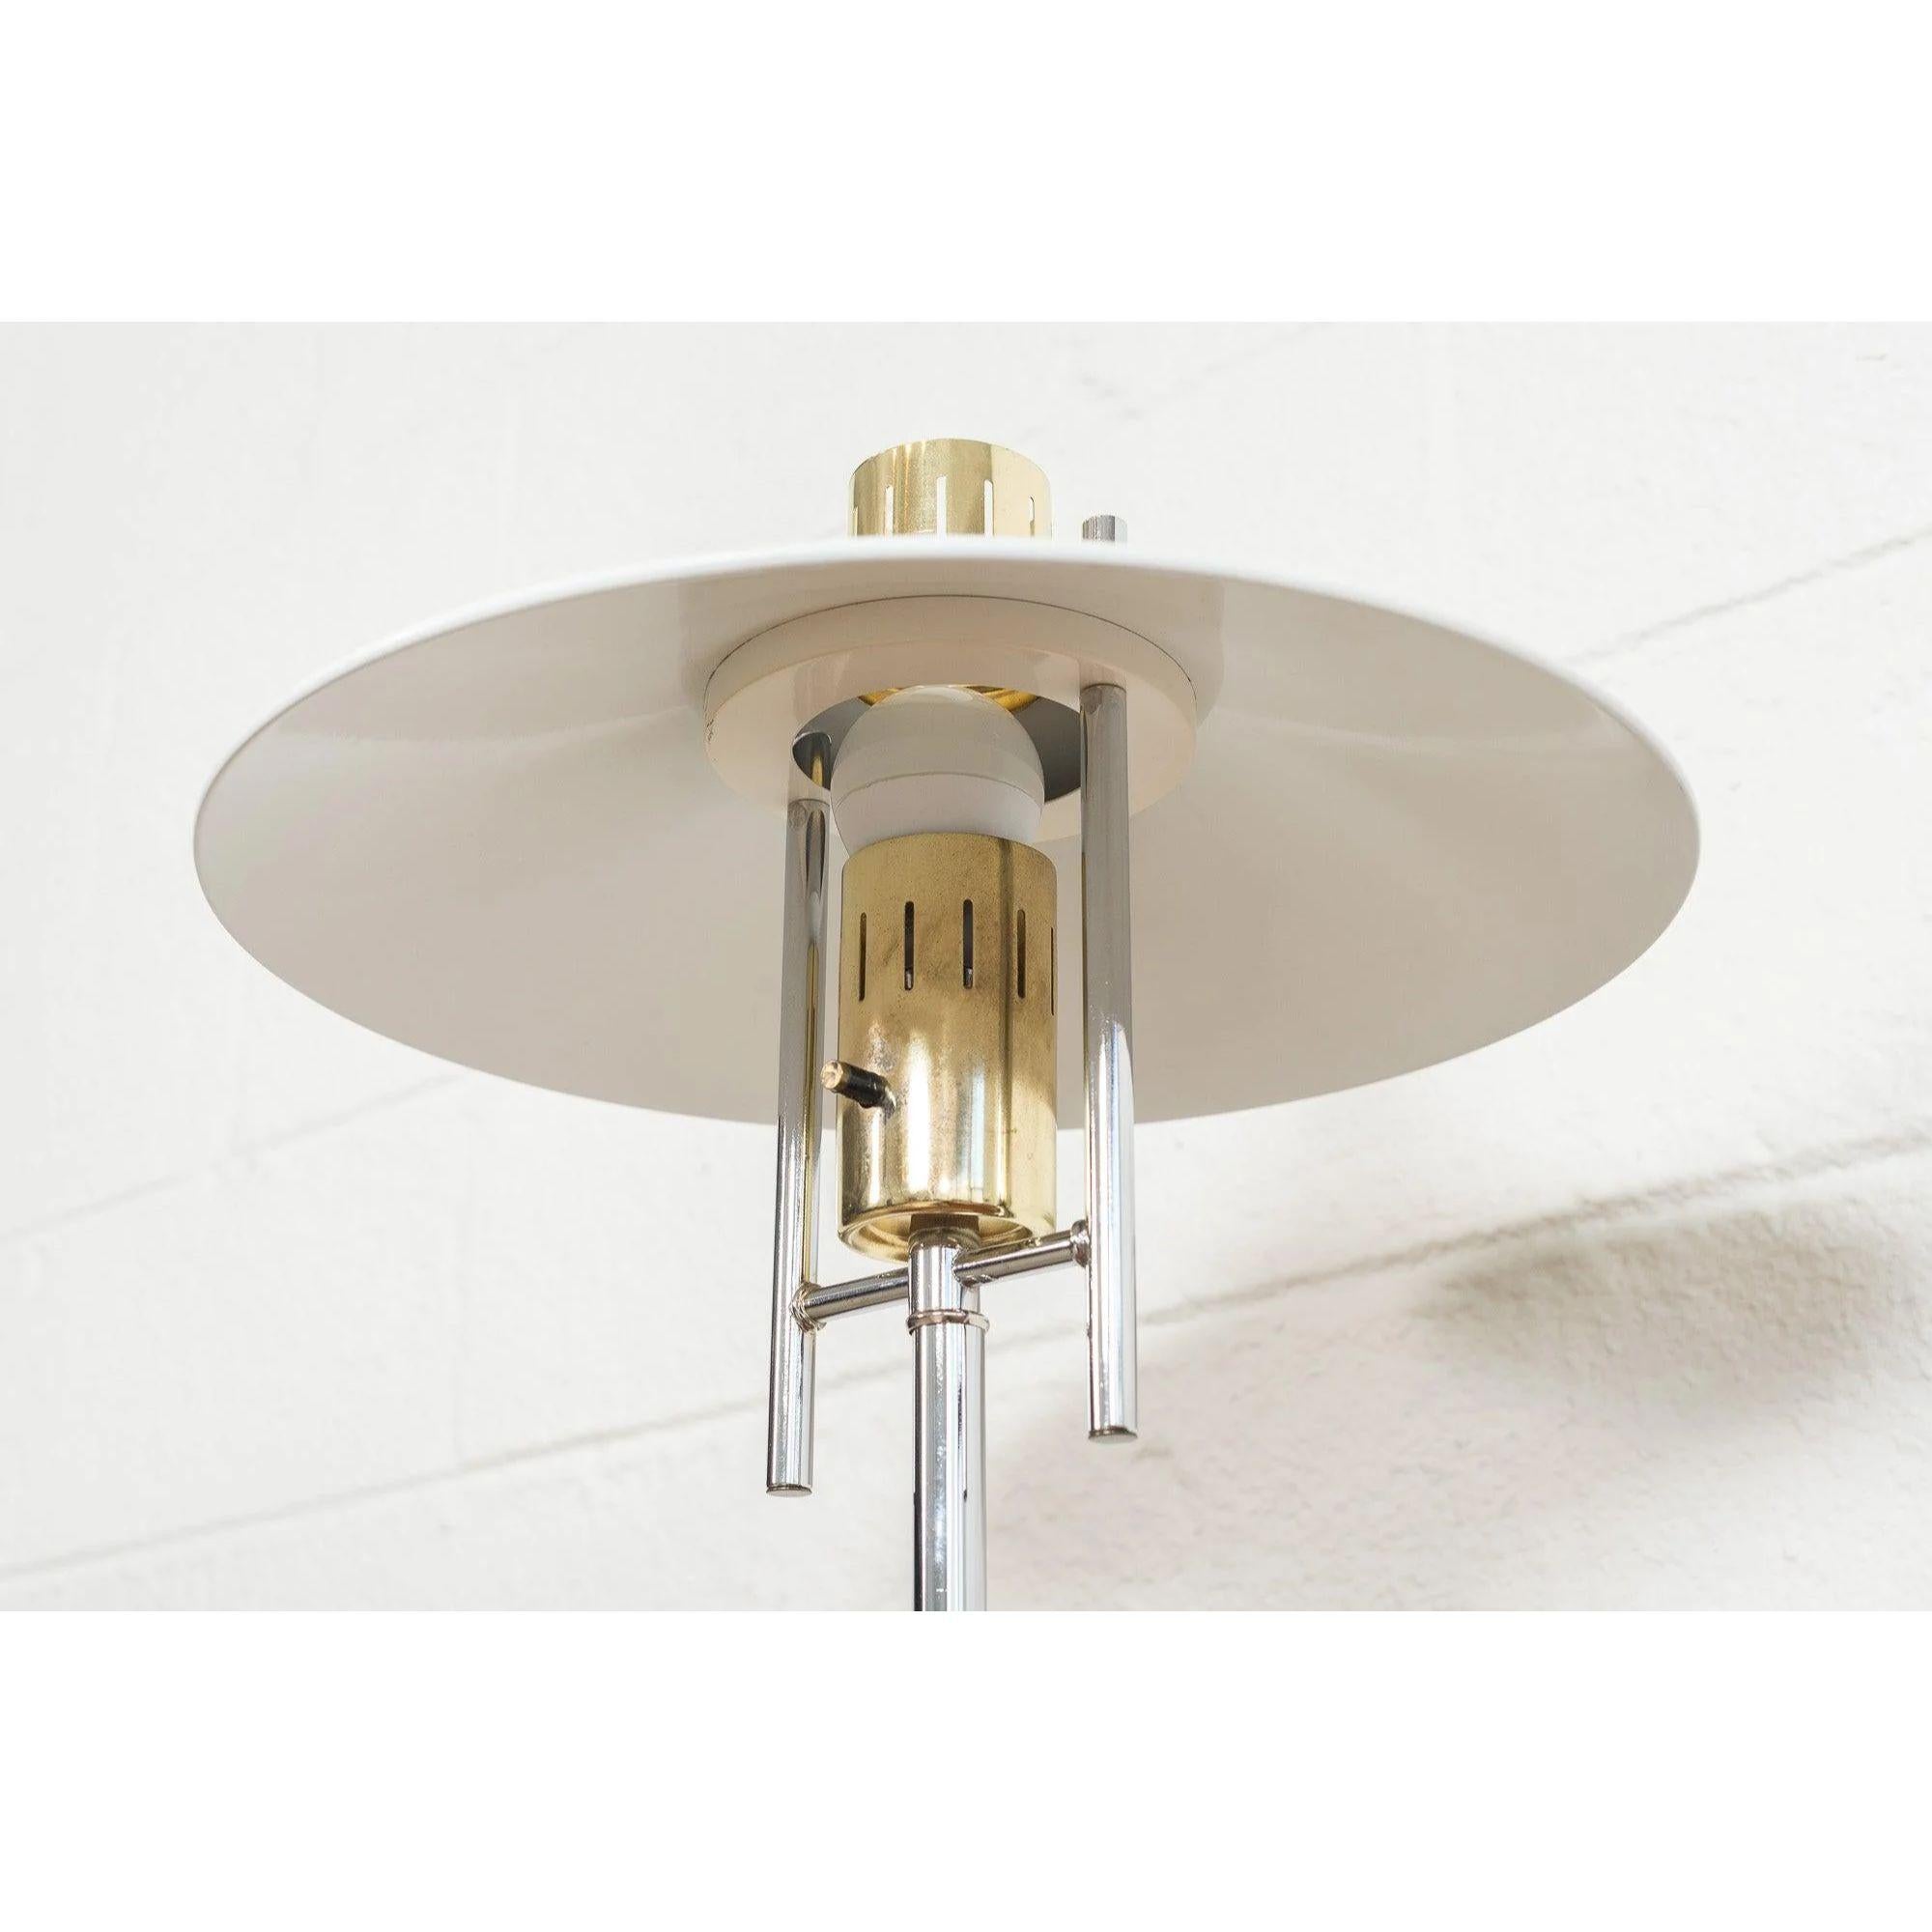 Mid-Century Modern White, Chrome and Brass Table Lamp, 1970s For Sale 4